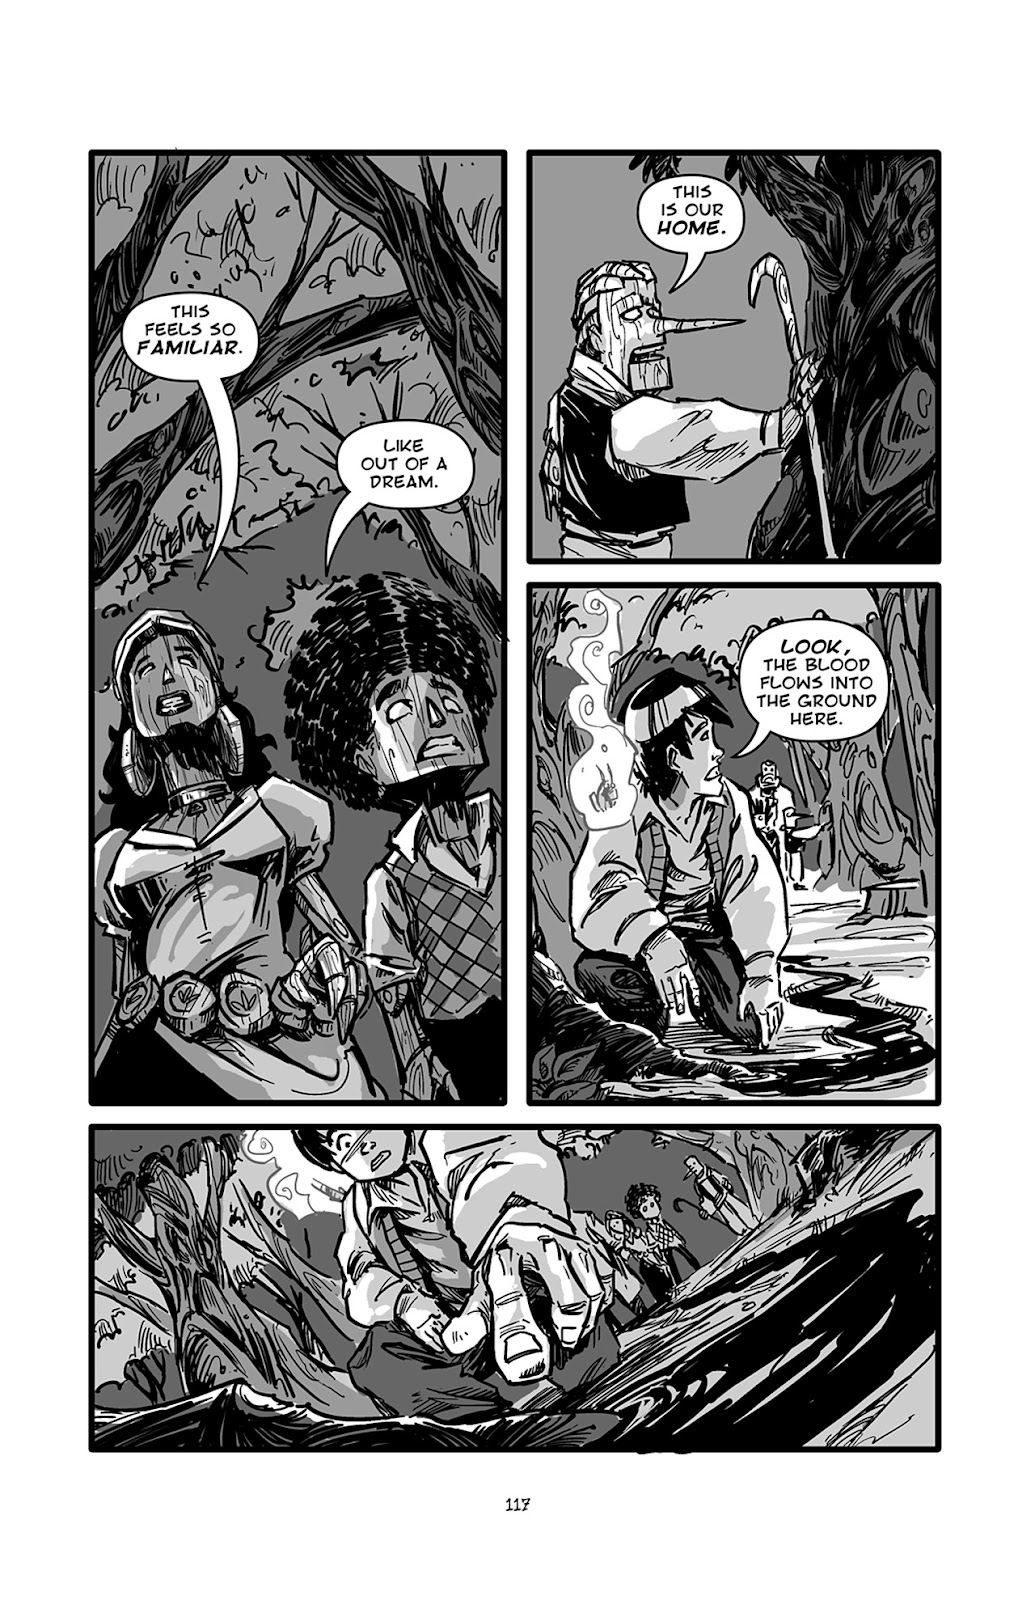 Pinocchio: Vampire Slayer - Of Wood and Blood issue 5 - Page 18